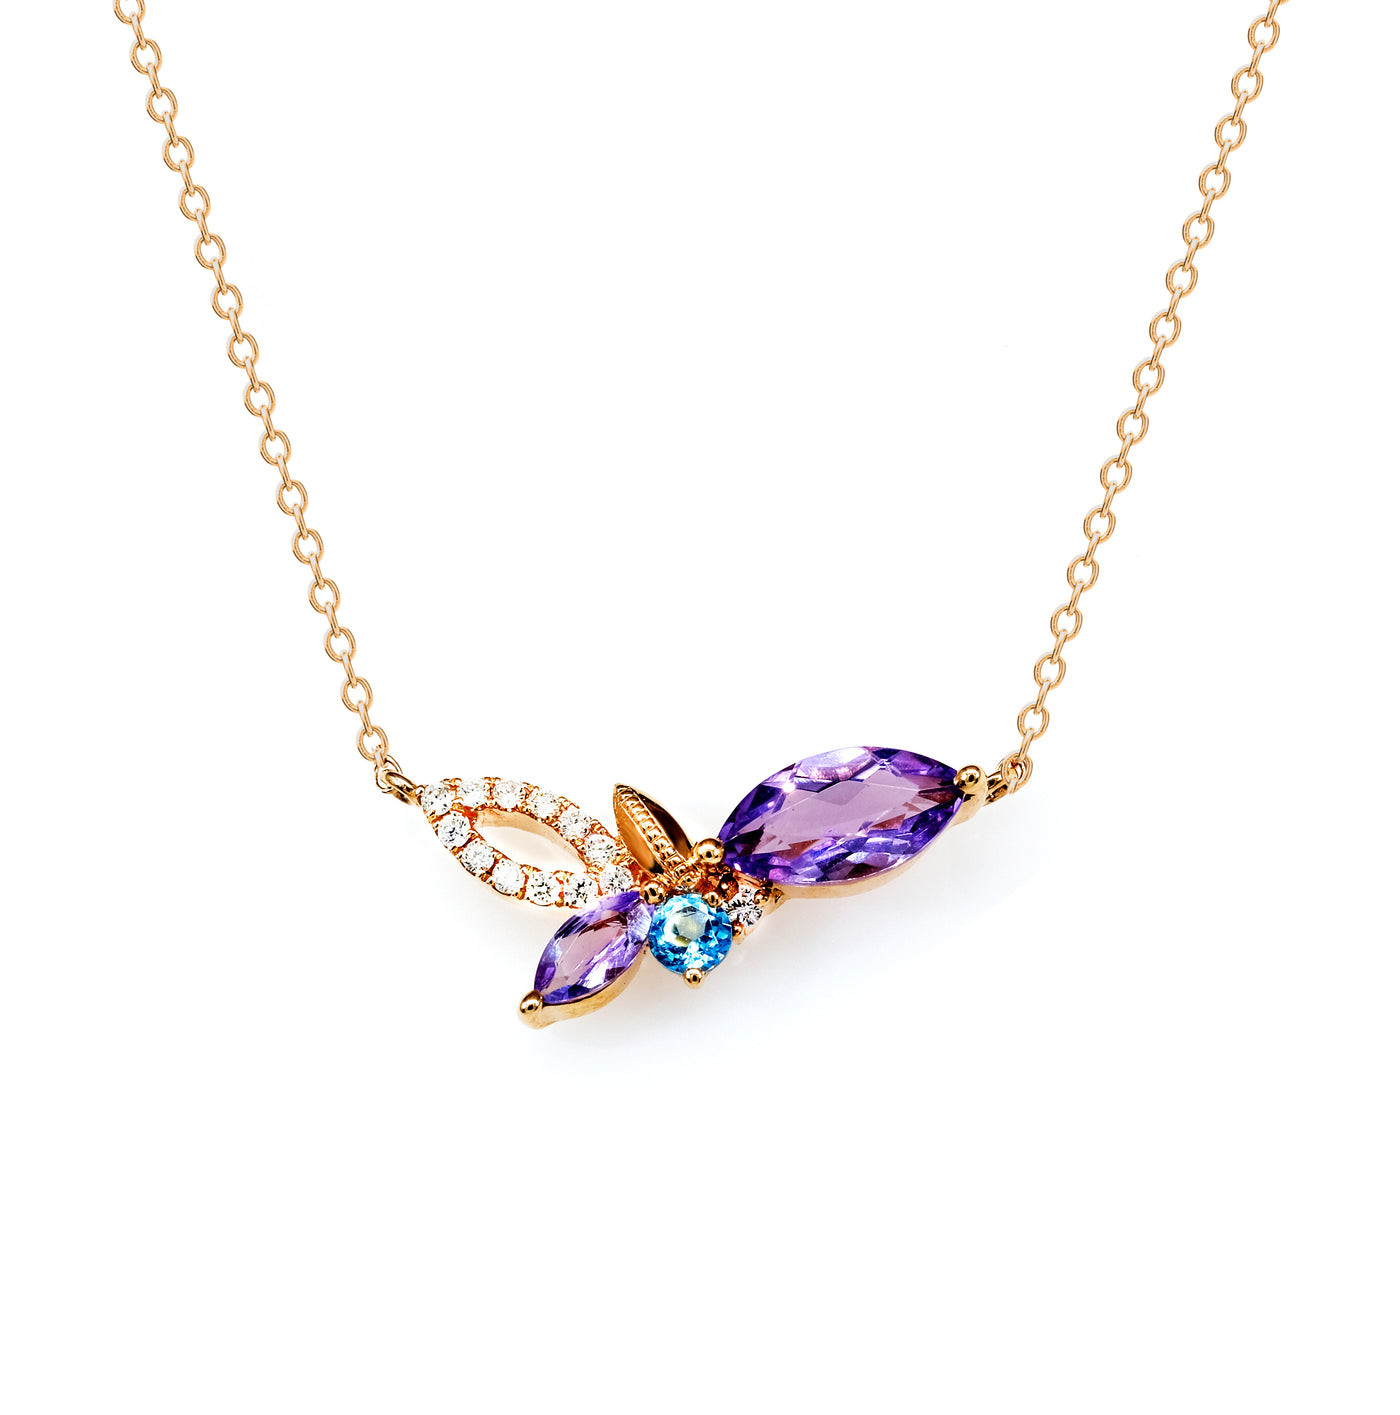 Rose Gold Necklace with Amethysts, Blue Topaz and Diamonds